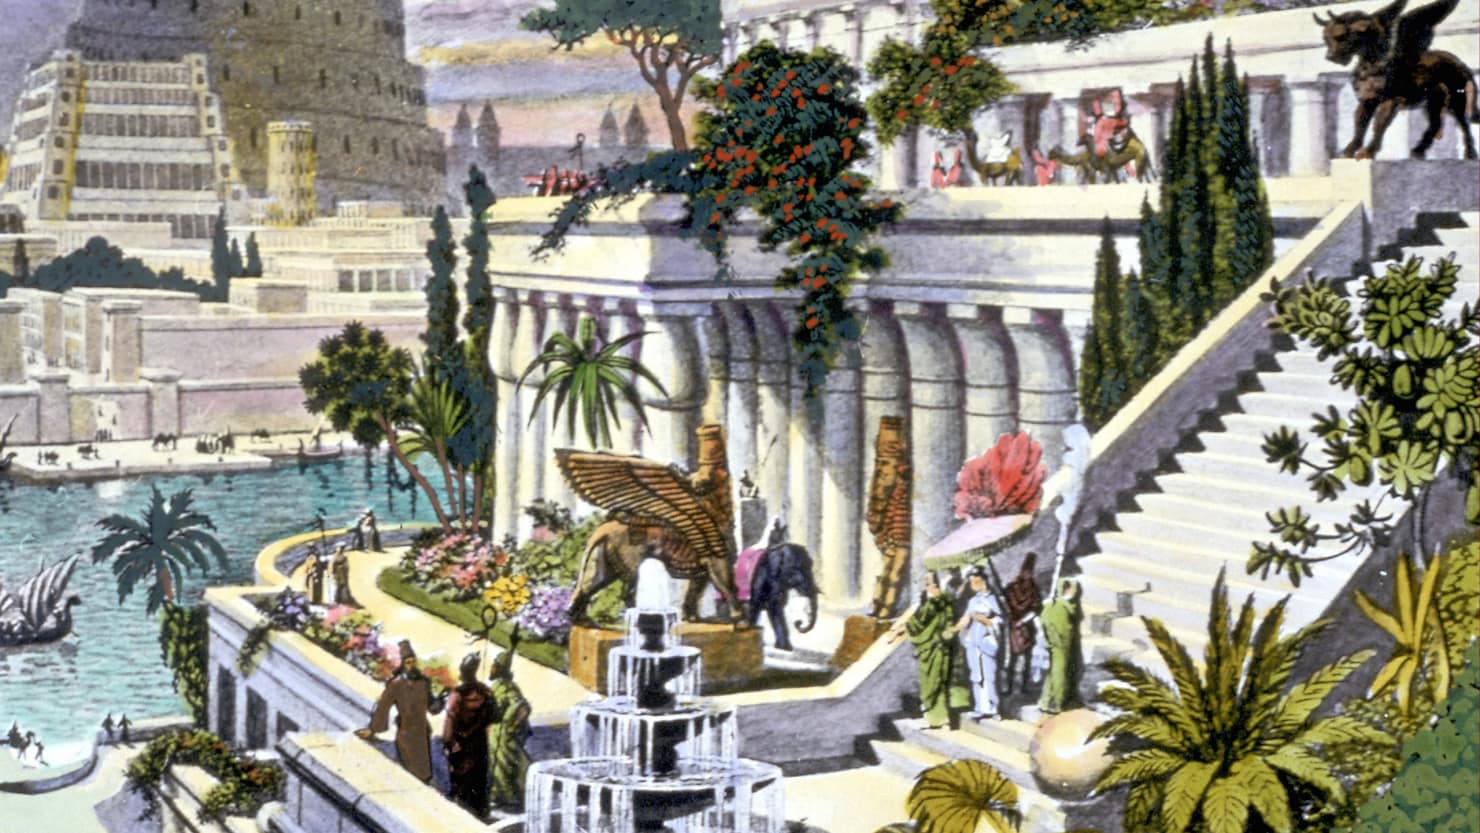 a picture of Hanging Gardens of Babylon based on stories told 